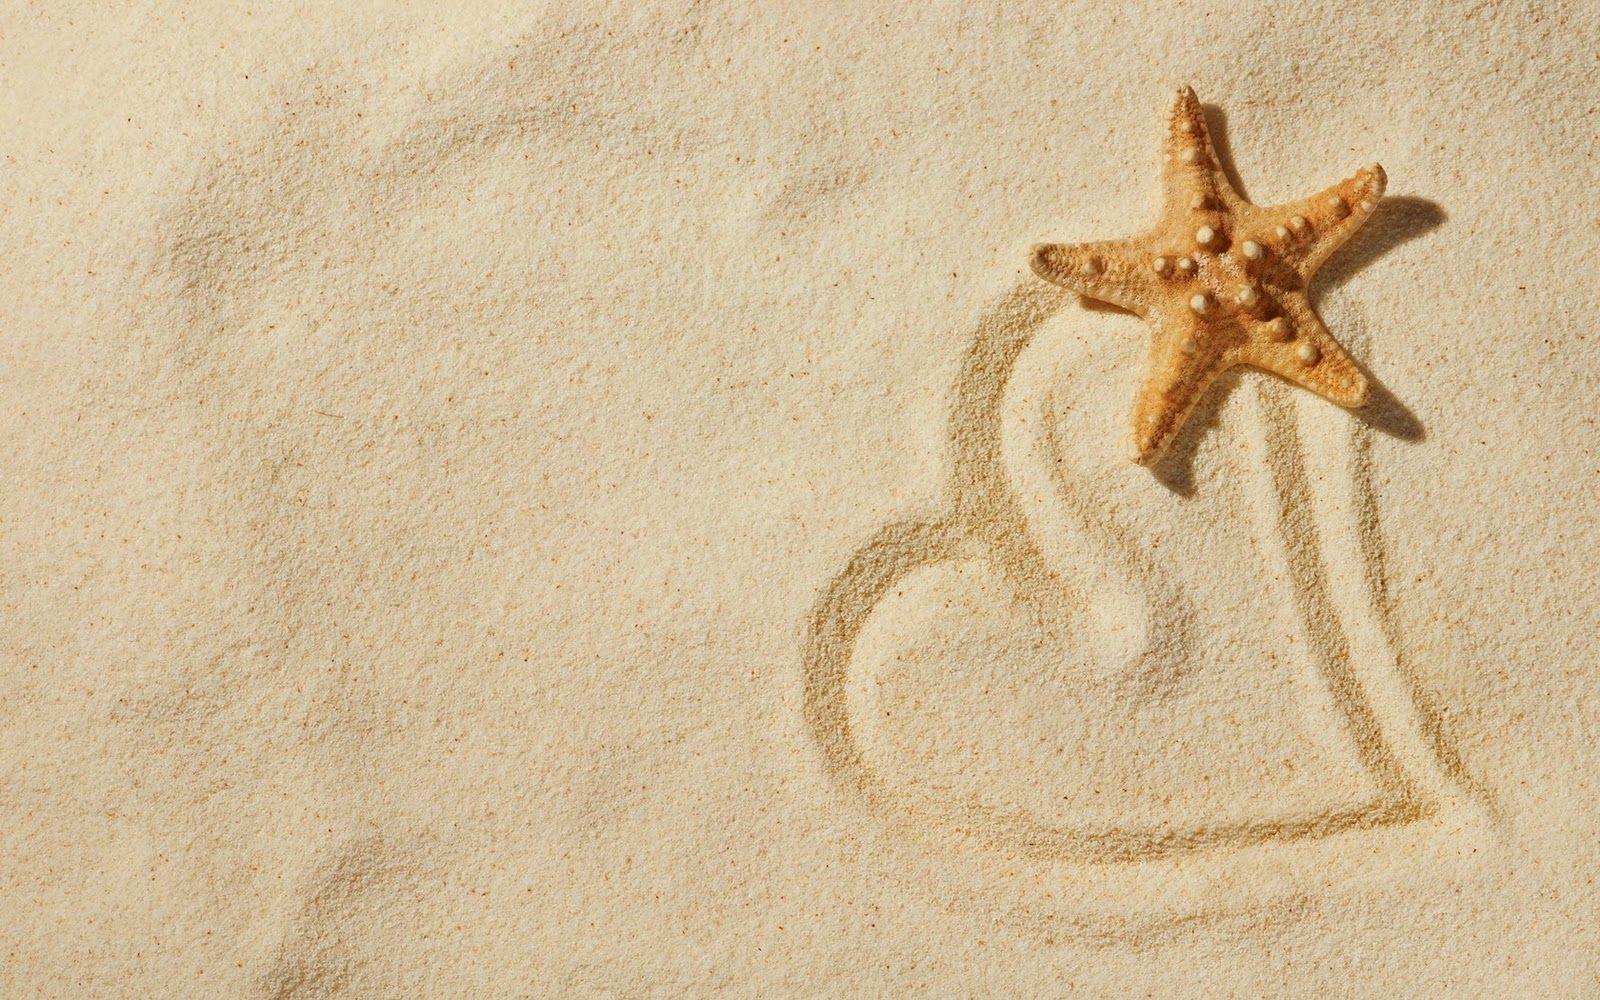 Starfish Background HD Wallpaper Res 1600x1000PX Wallpaper